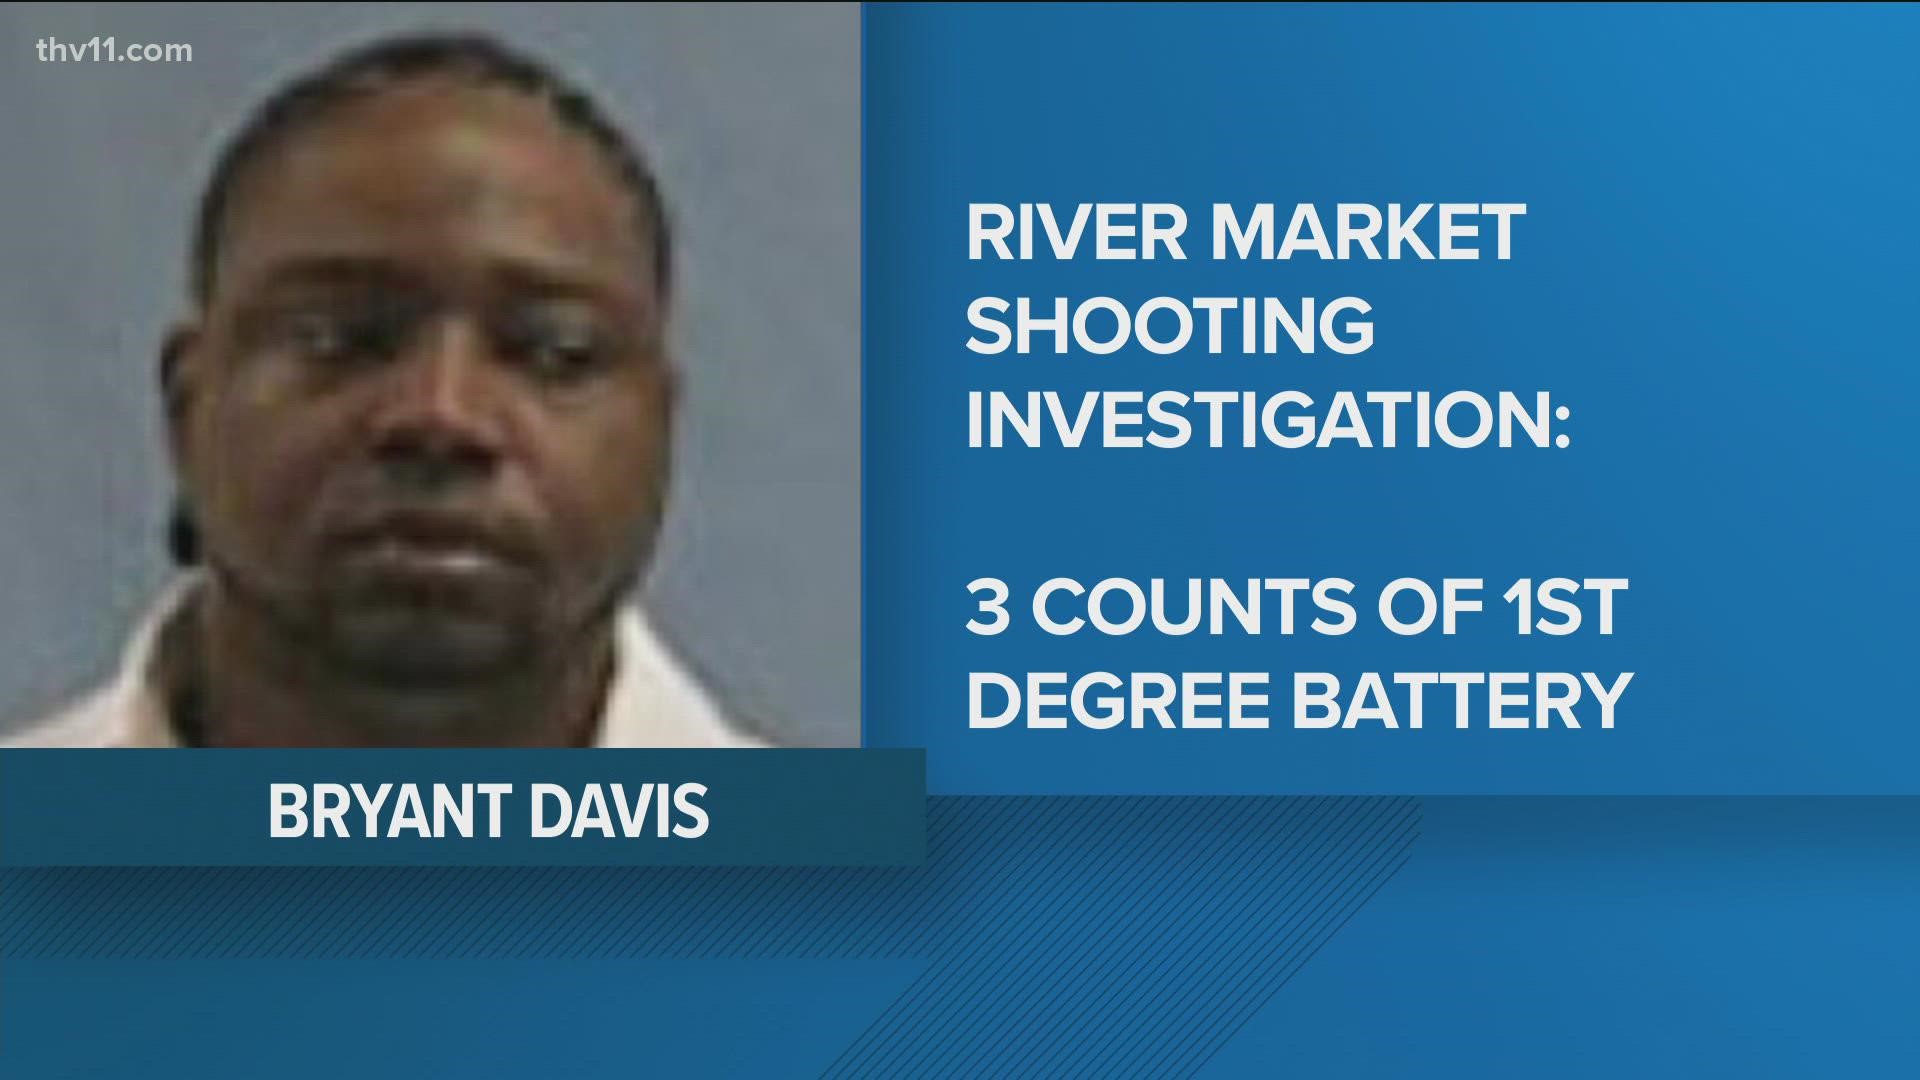 Little Rock police arrested Bryant Davis in connection to a shooting that happened in the River Market last weekend. He's now facing first degree battery charges.